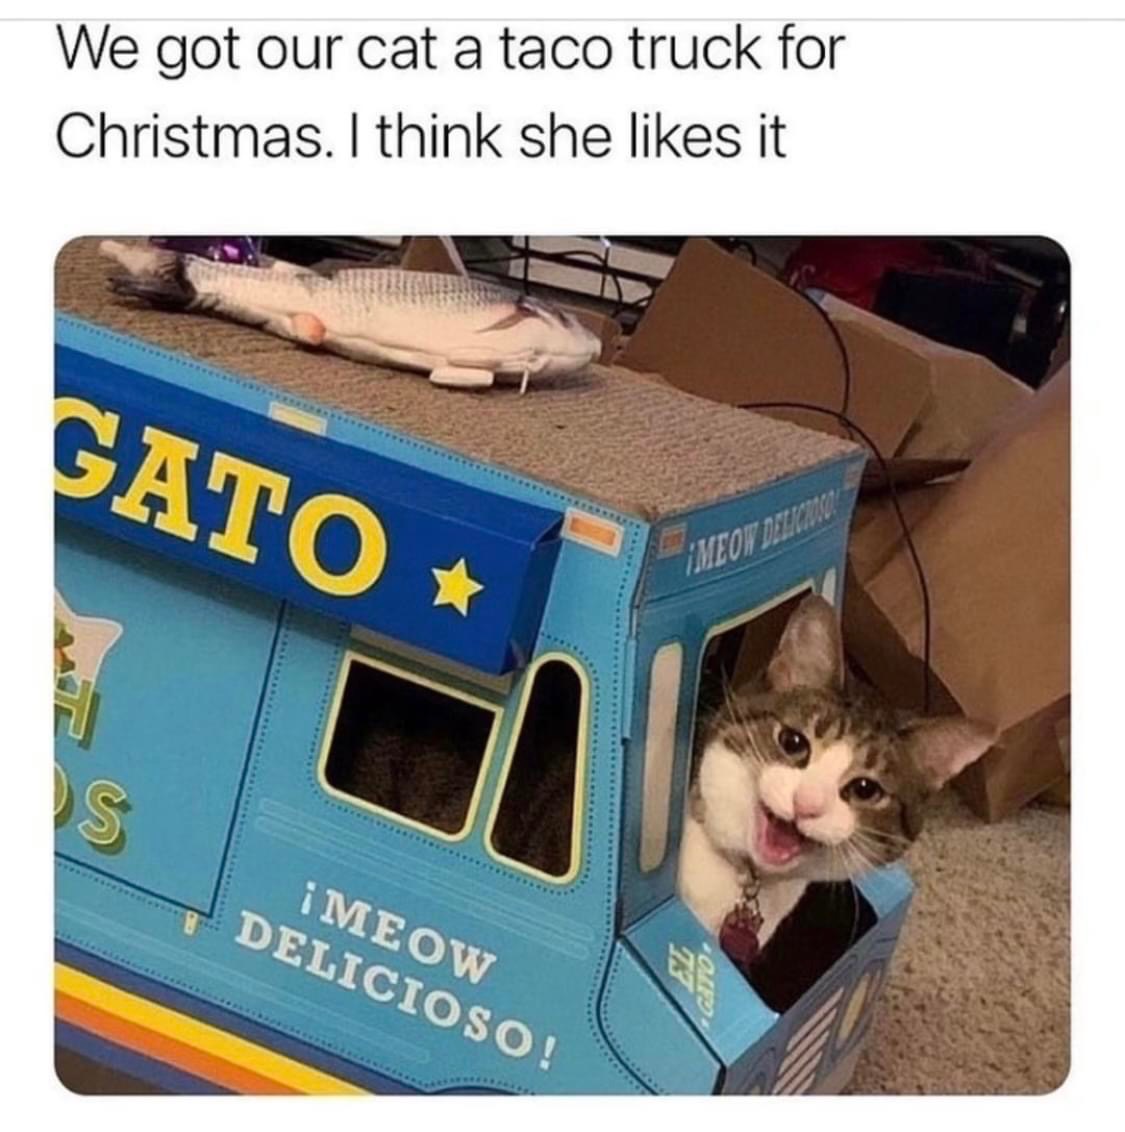 we got our car a taco truck for christmas, i think she likes it